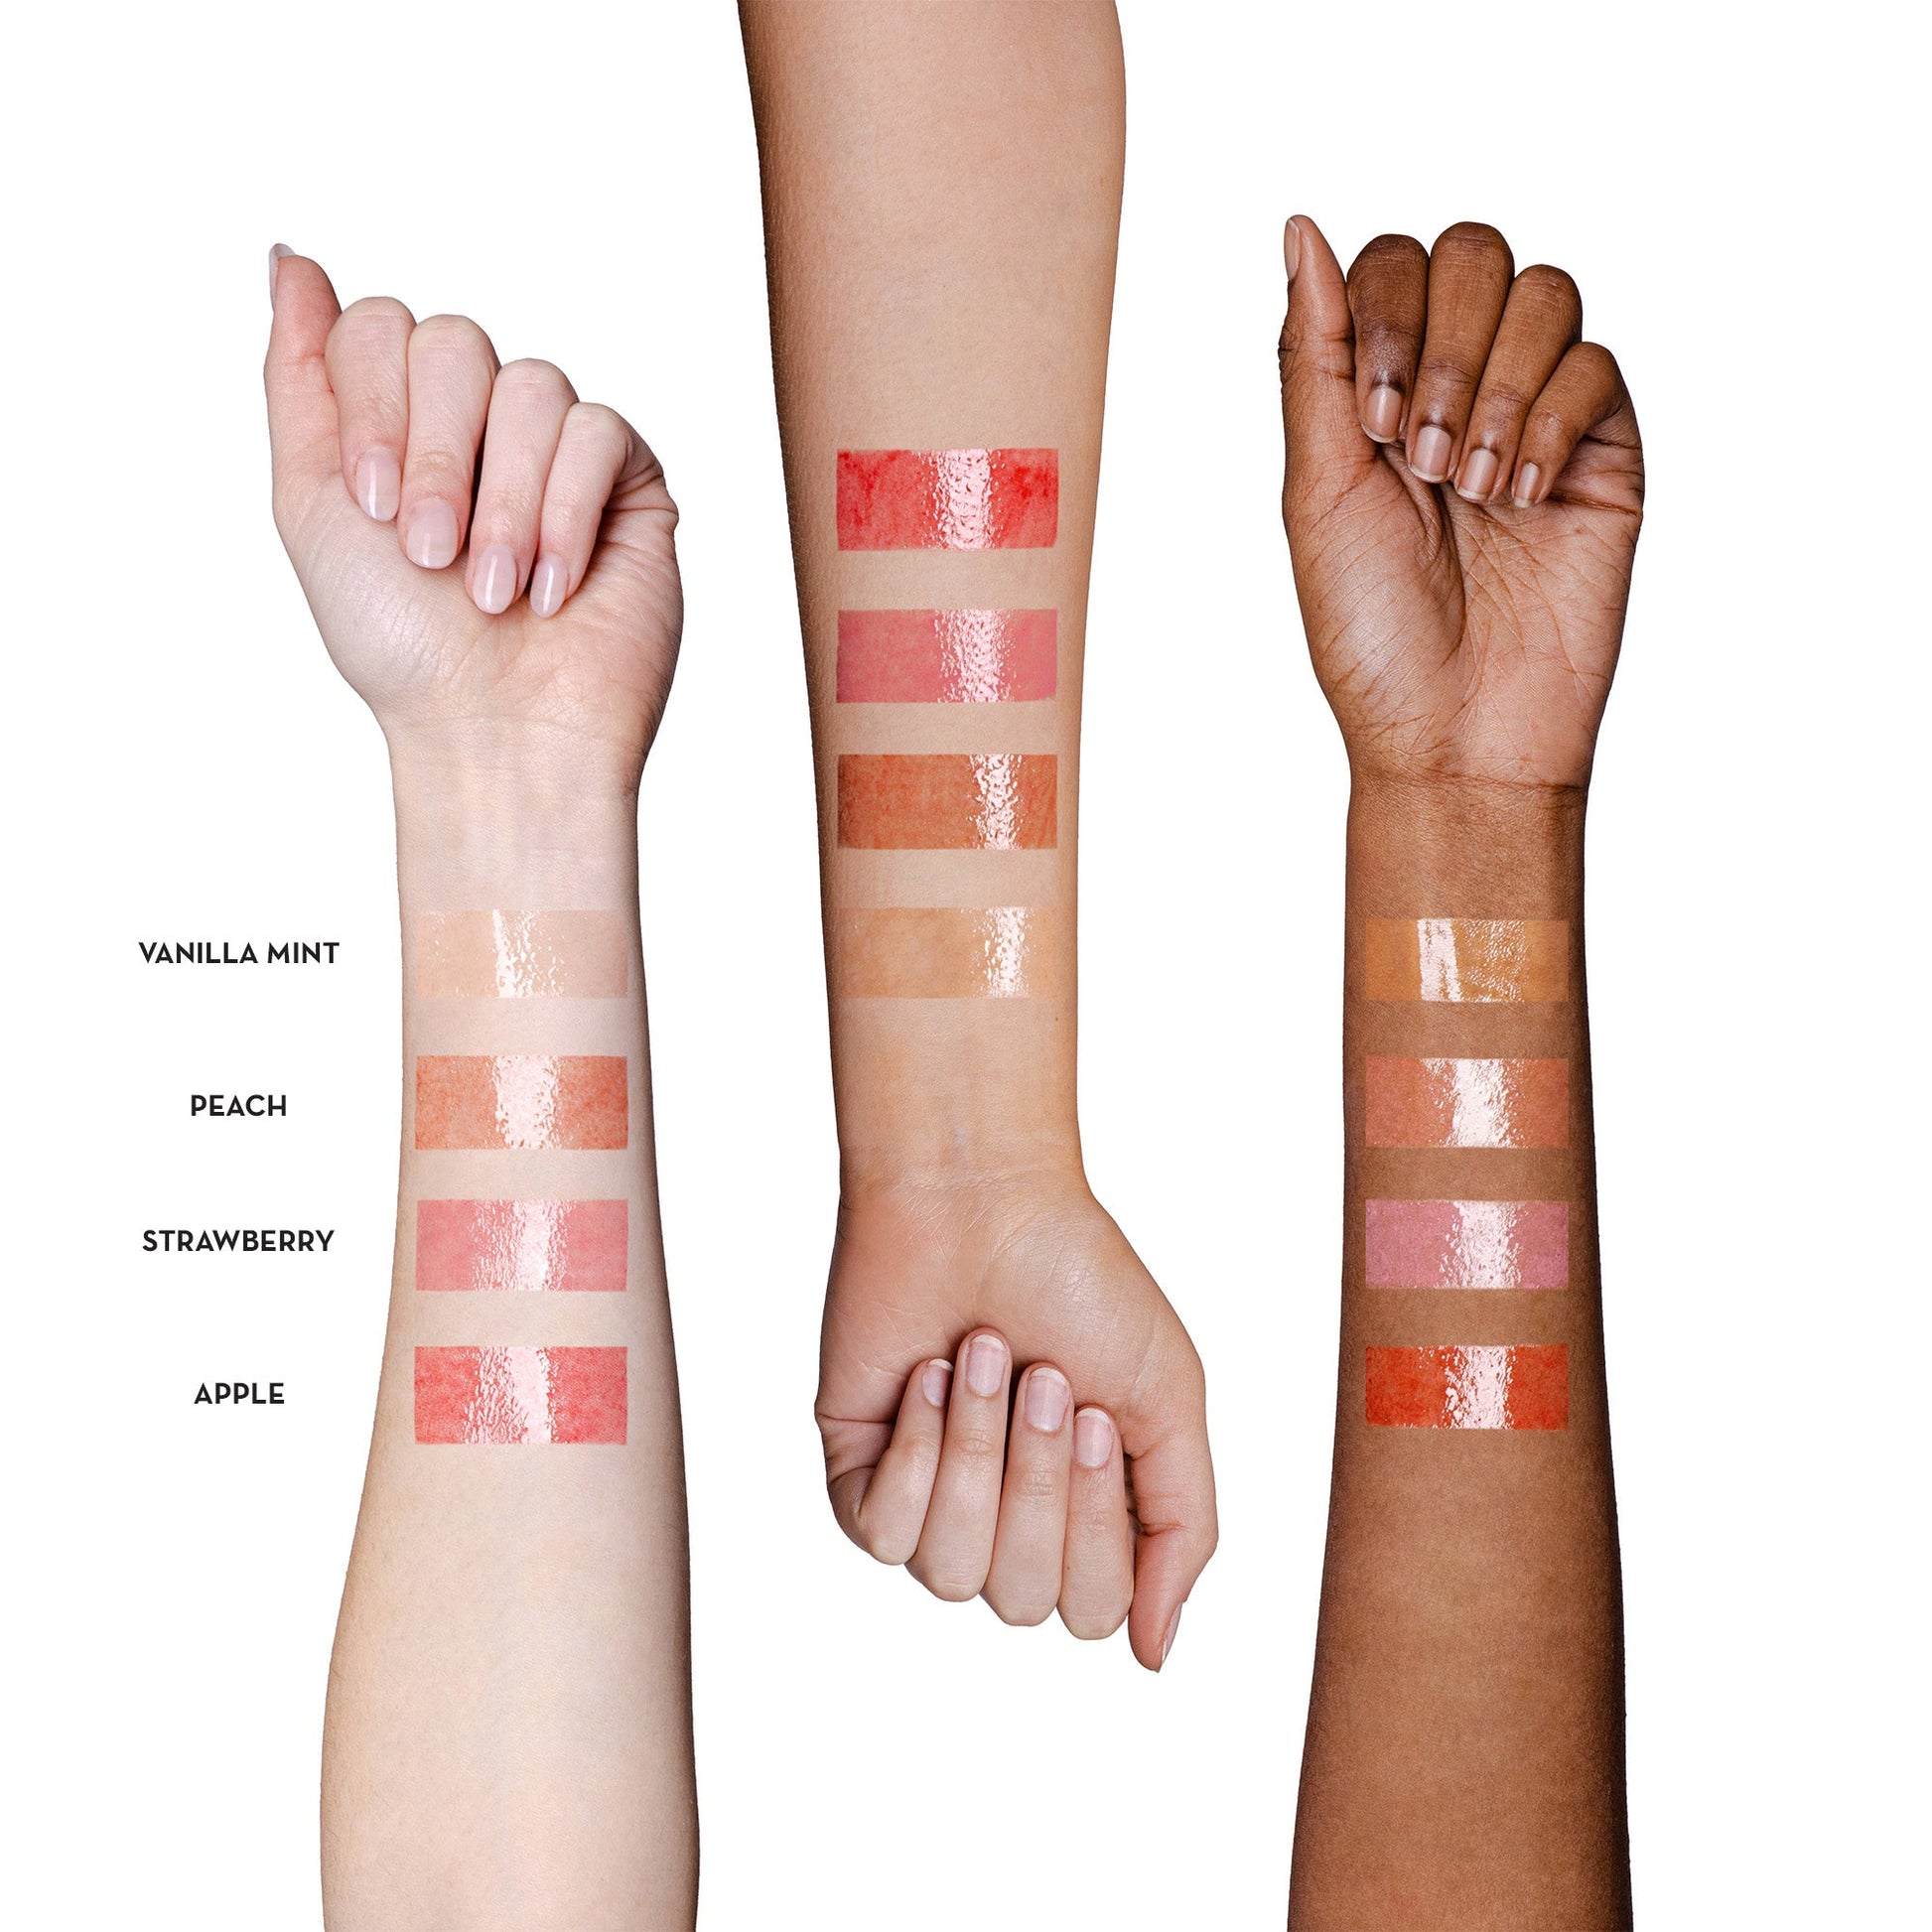 Shop Swatches